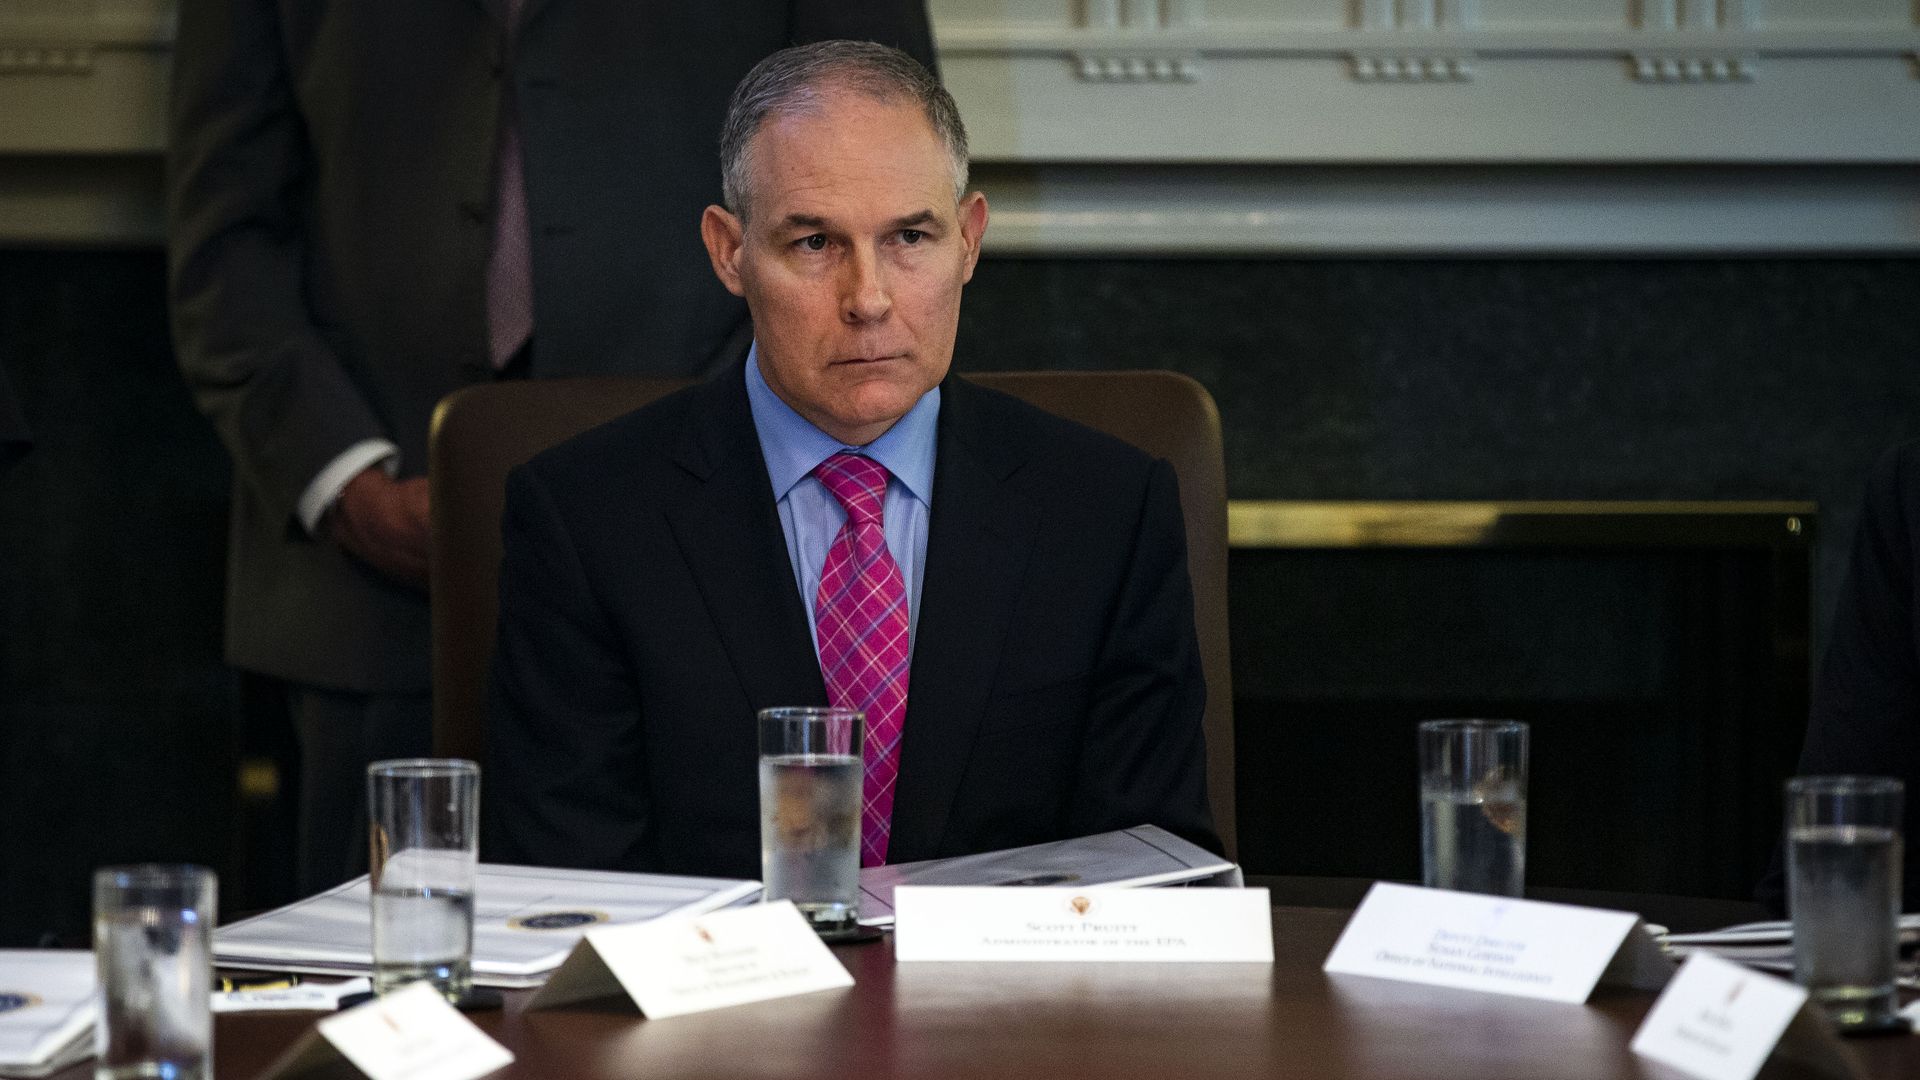 EPA Administrator Scott Pruitt during a Cabinet meeting May 9, 2018, in the Cabinet Room of the White House.